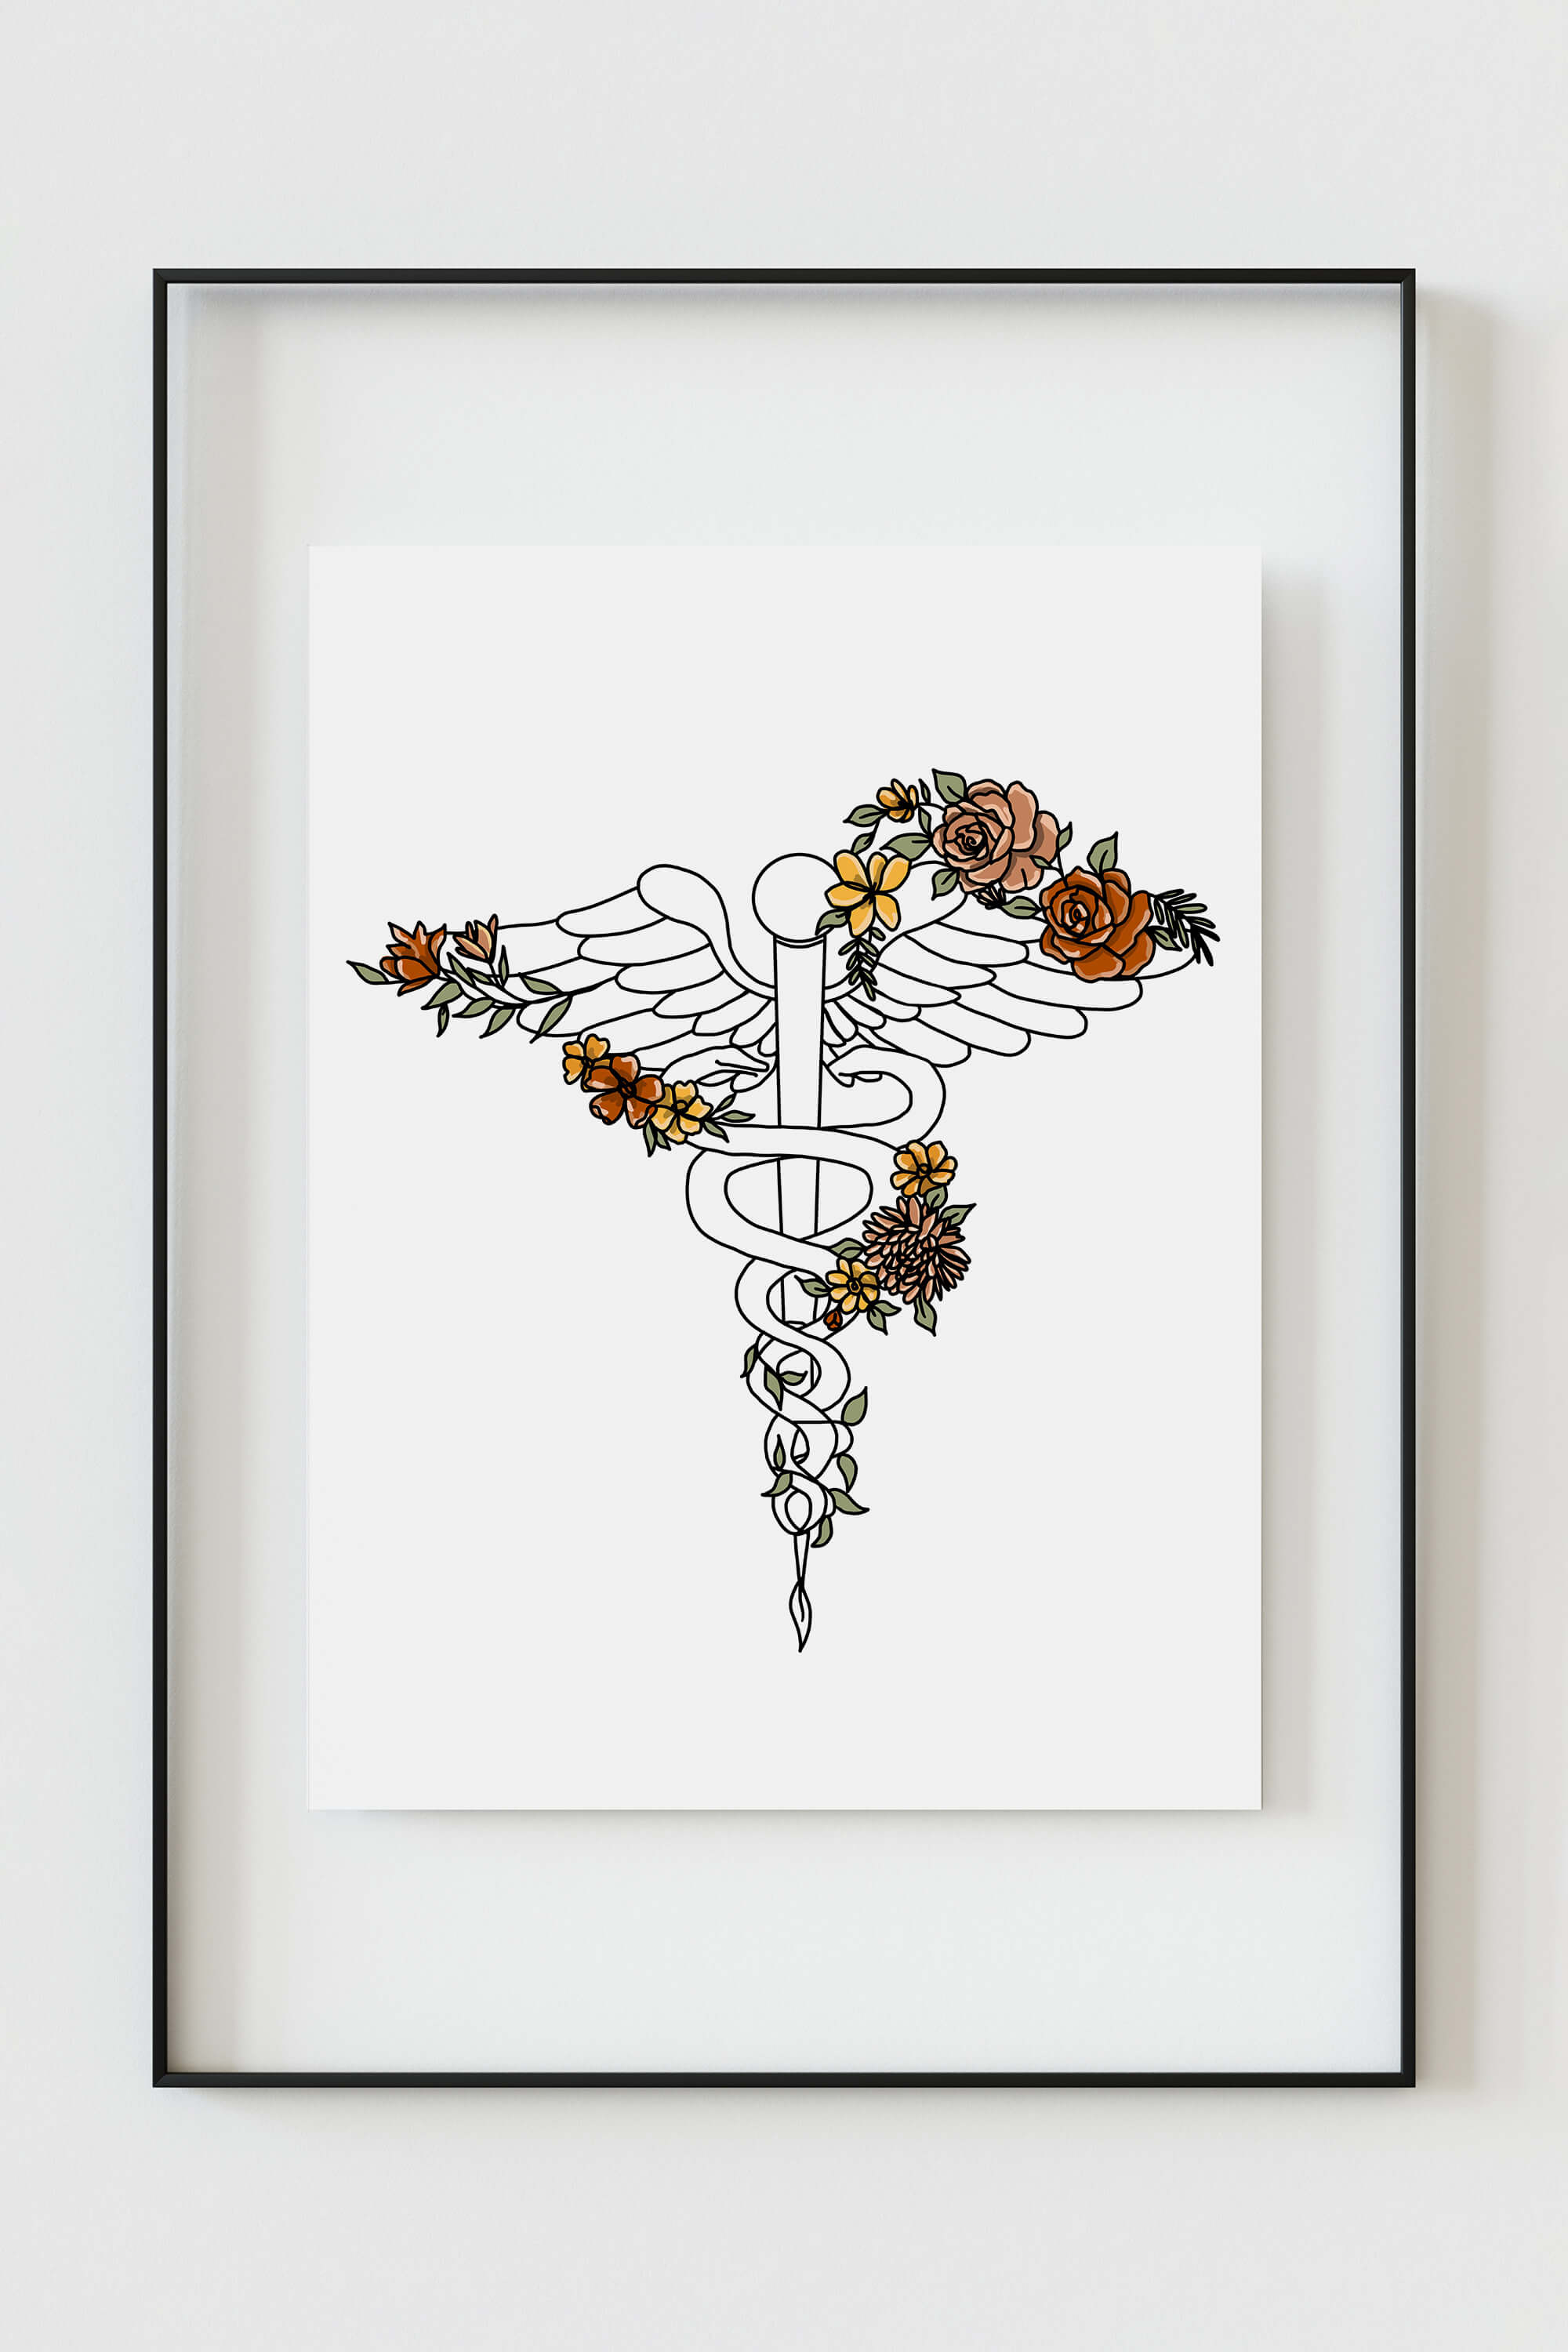 Colorful Caduceus Wall Art adding a touch of warmth to therapist offices with modern floral accents.